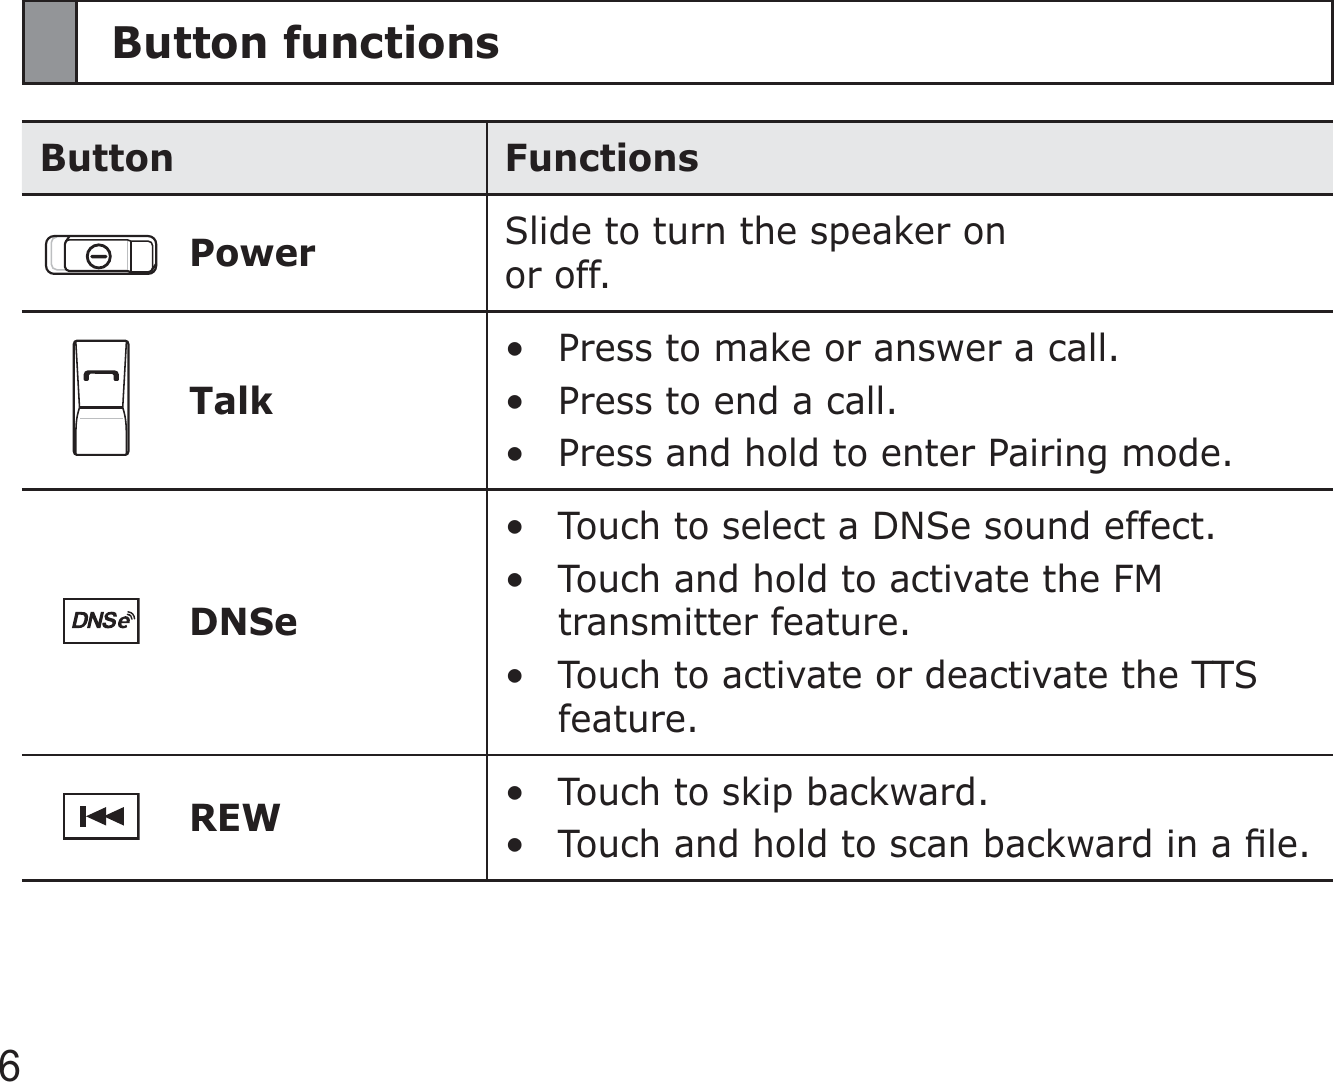 6Button functionsButton Functions Power Slide to turn the speaker on  or off.TalkPress to make or answer a call.Press to end a call.Press and hold to enter Pairing mode.•••DNSeTouch to select a DNSe sound effect.Touch and hold to activate the FM transmitter feature.Touch to activate or deactivate the TTS feature.•••REW Touch to skip backward.Touch and hold to scan backward in a ﬁle.••